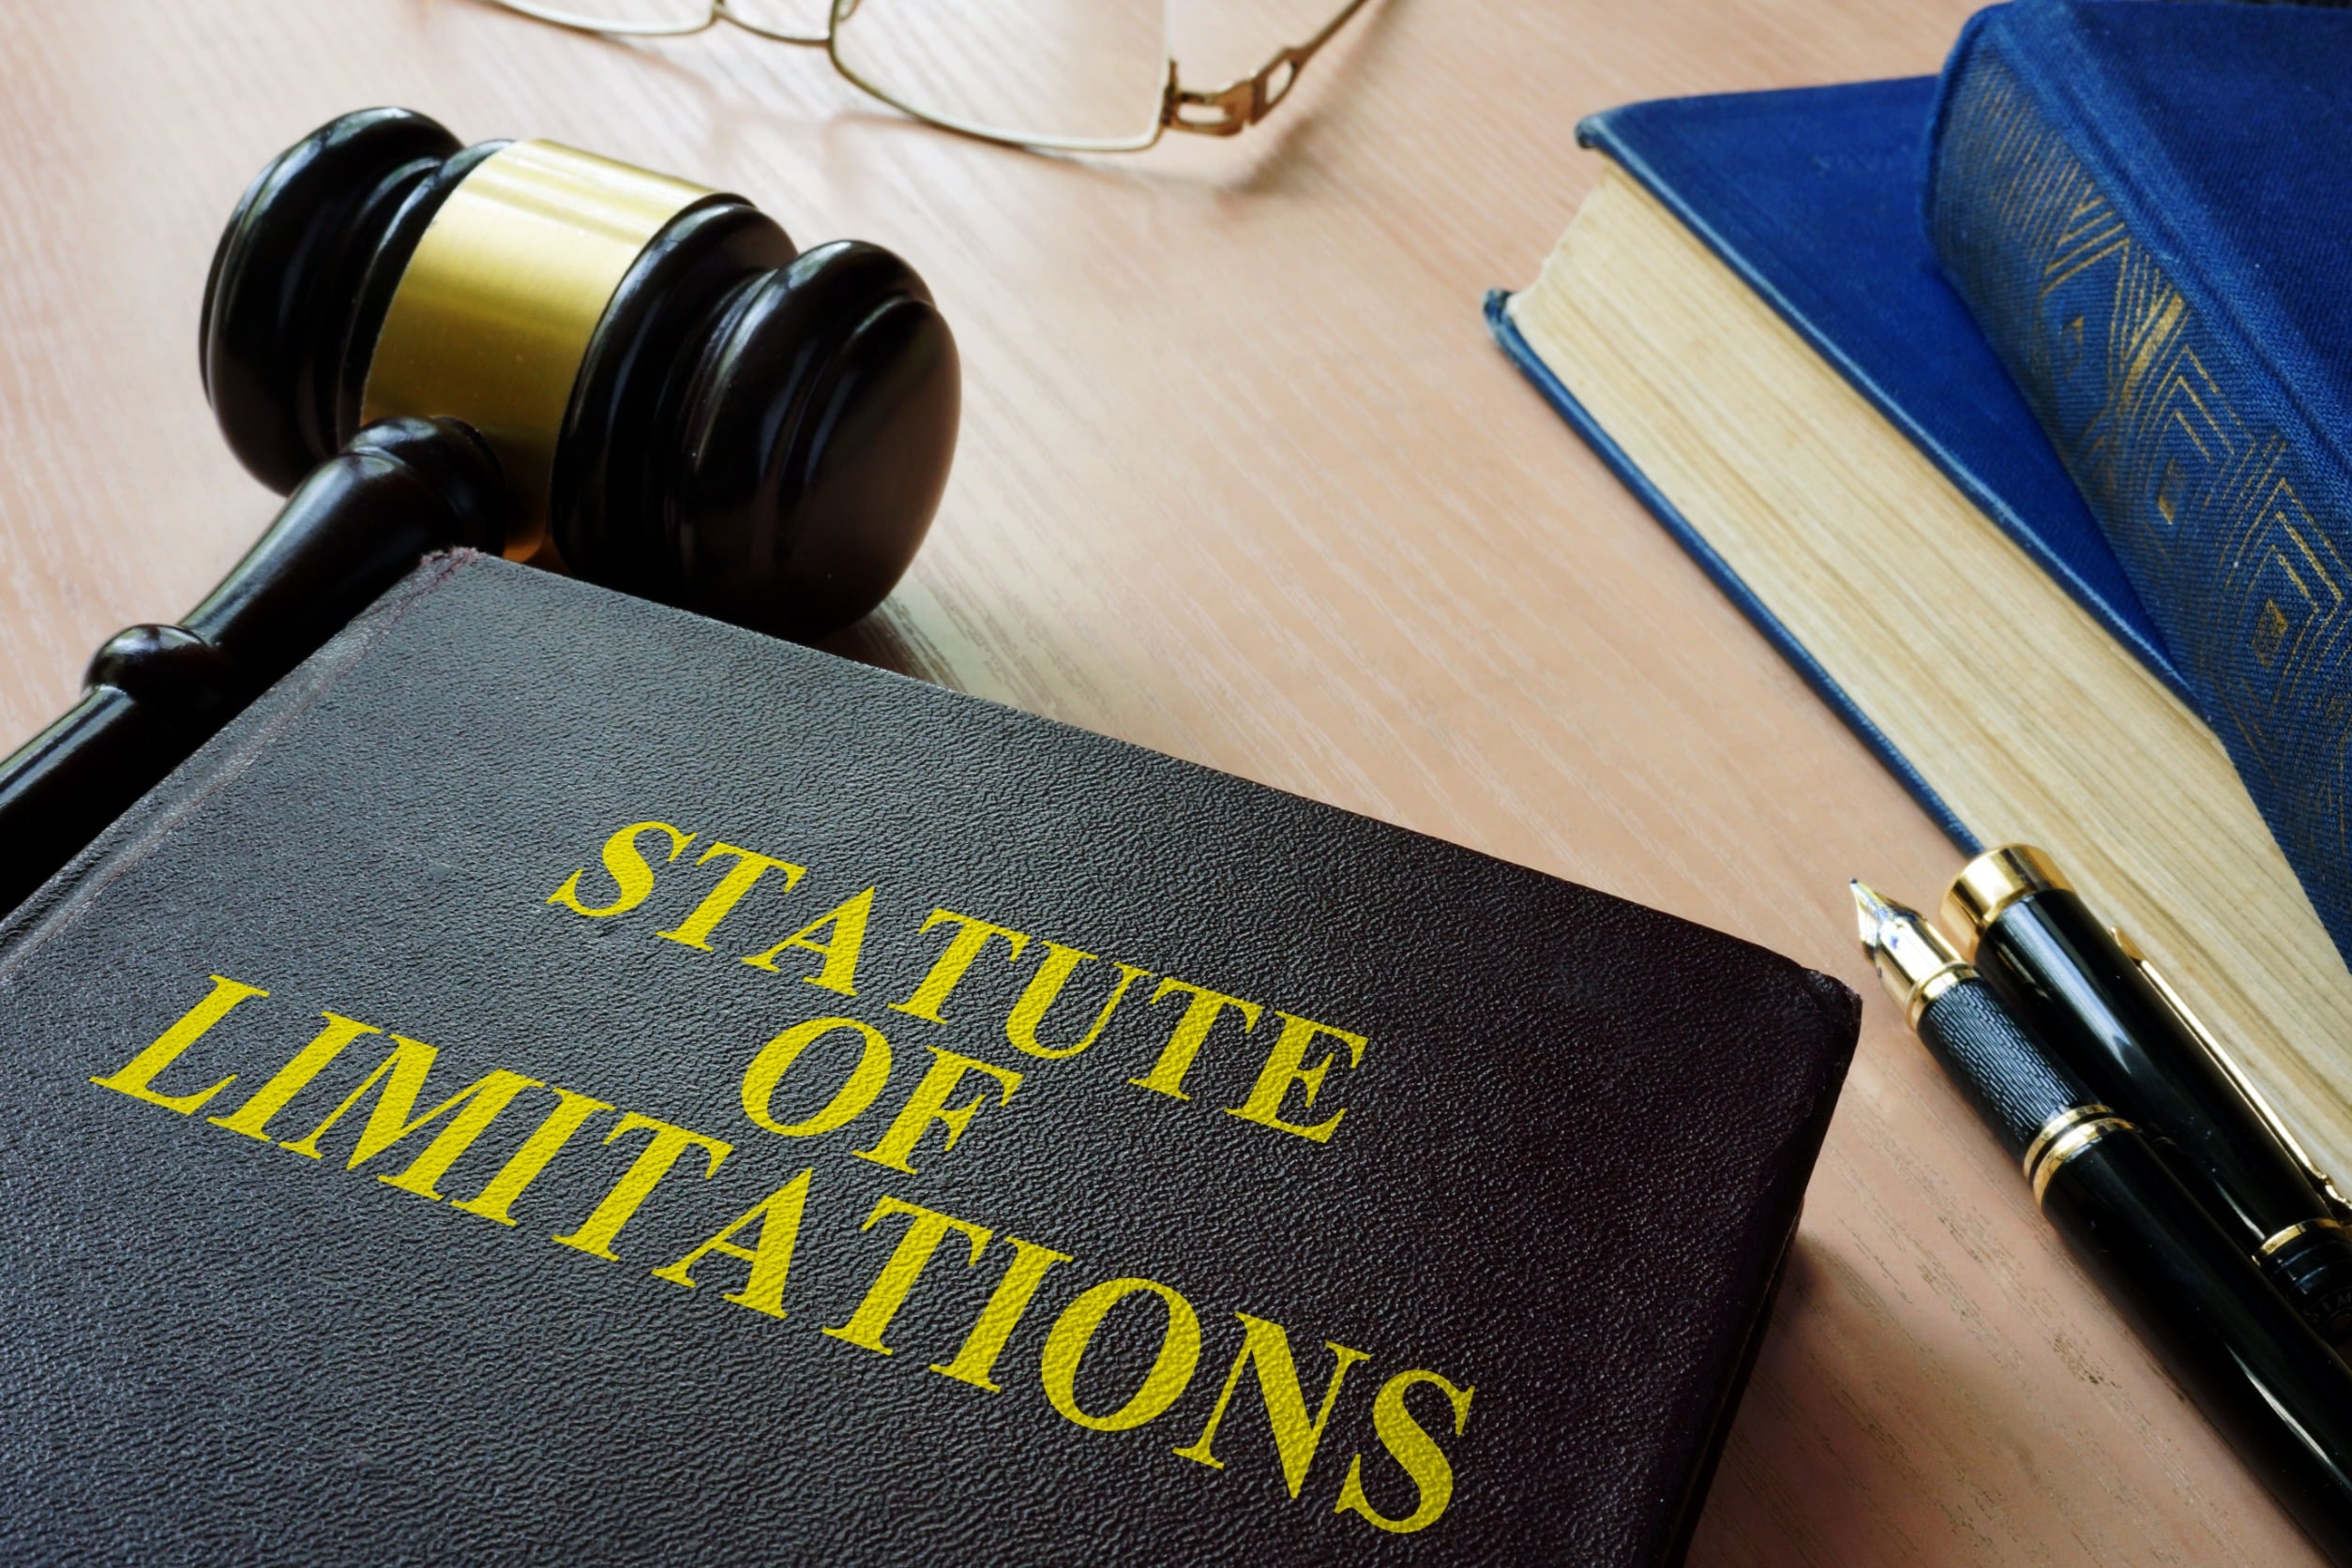 Statute of Limitations: How Do They Apply to Federal Crimes in TX?